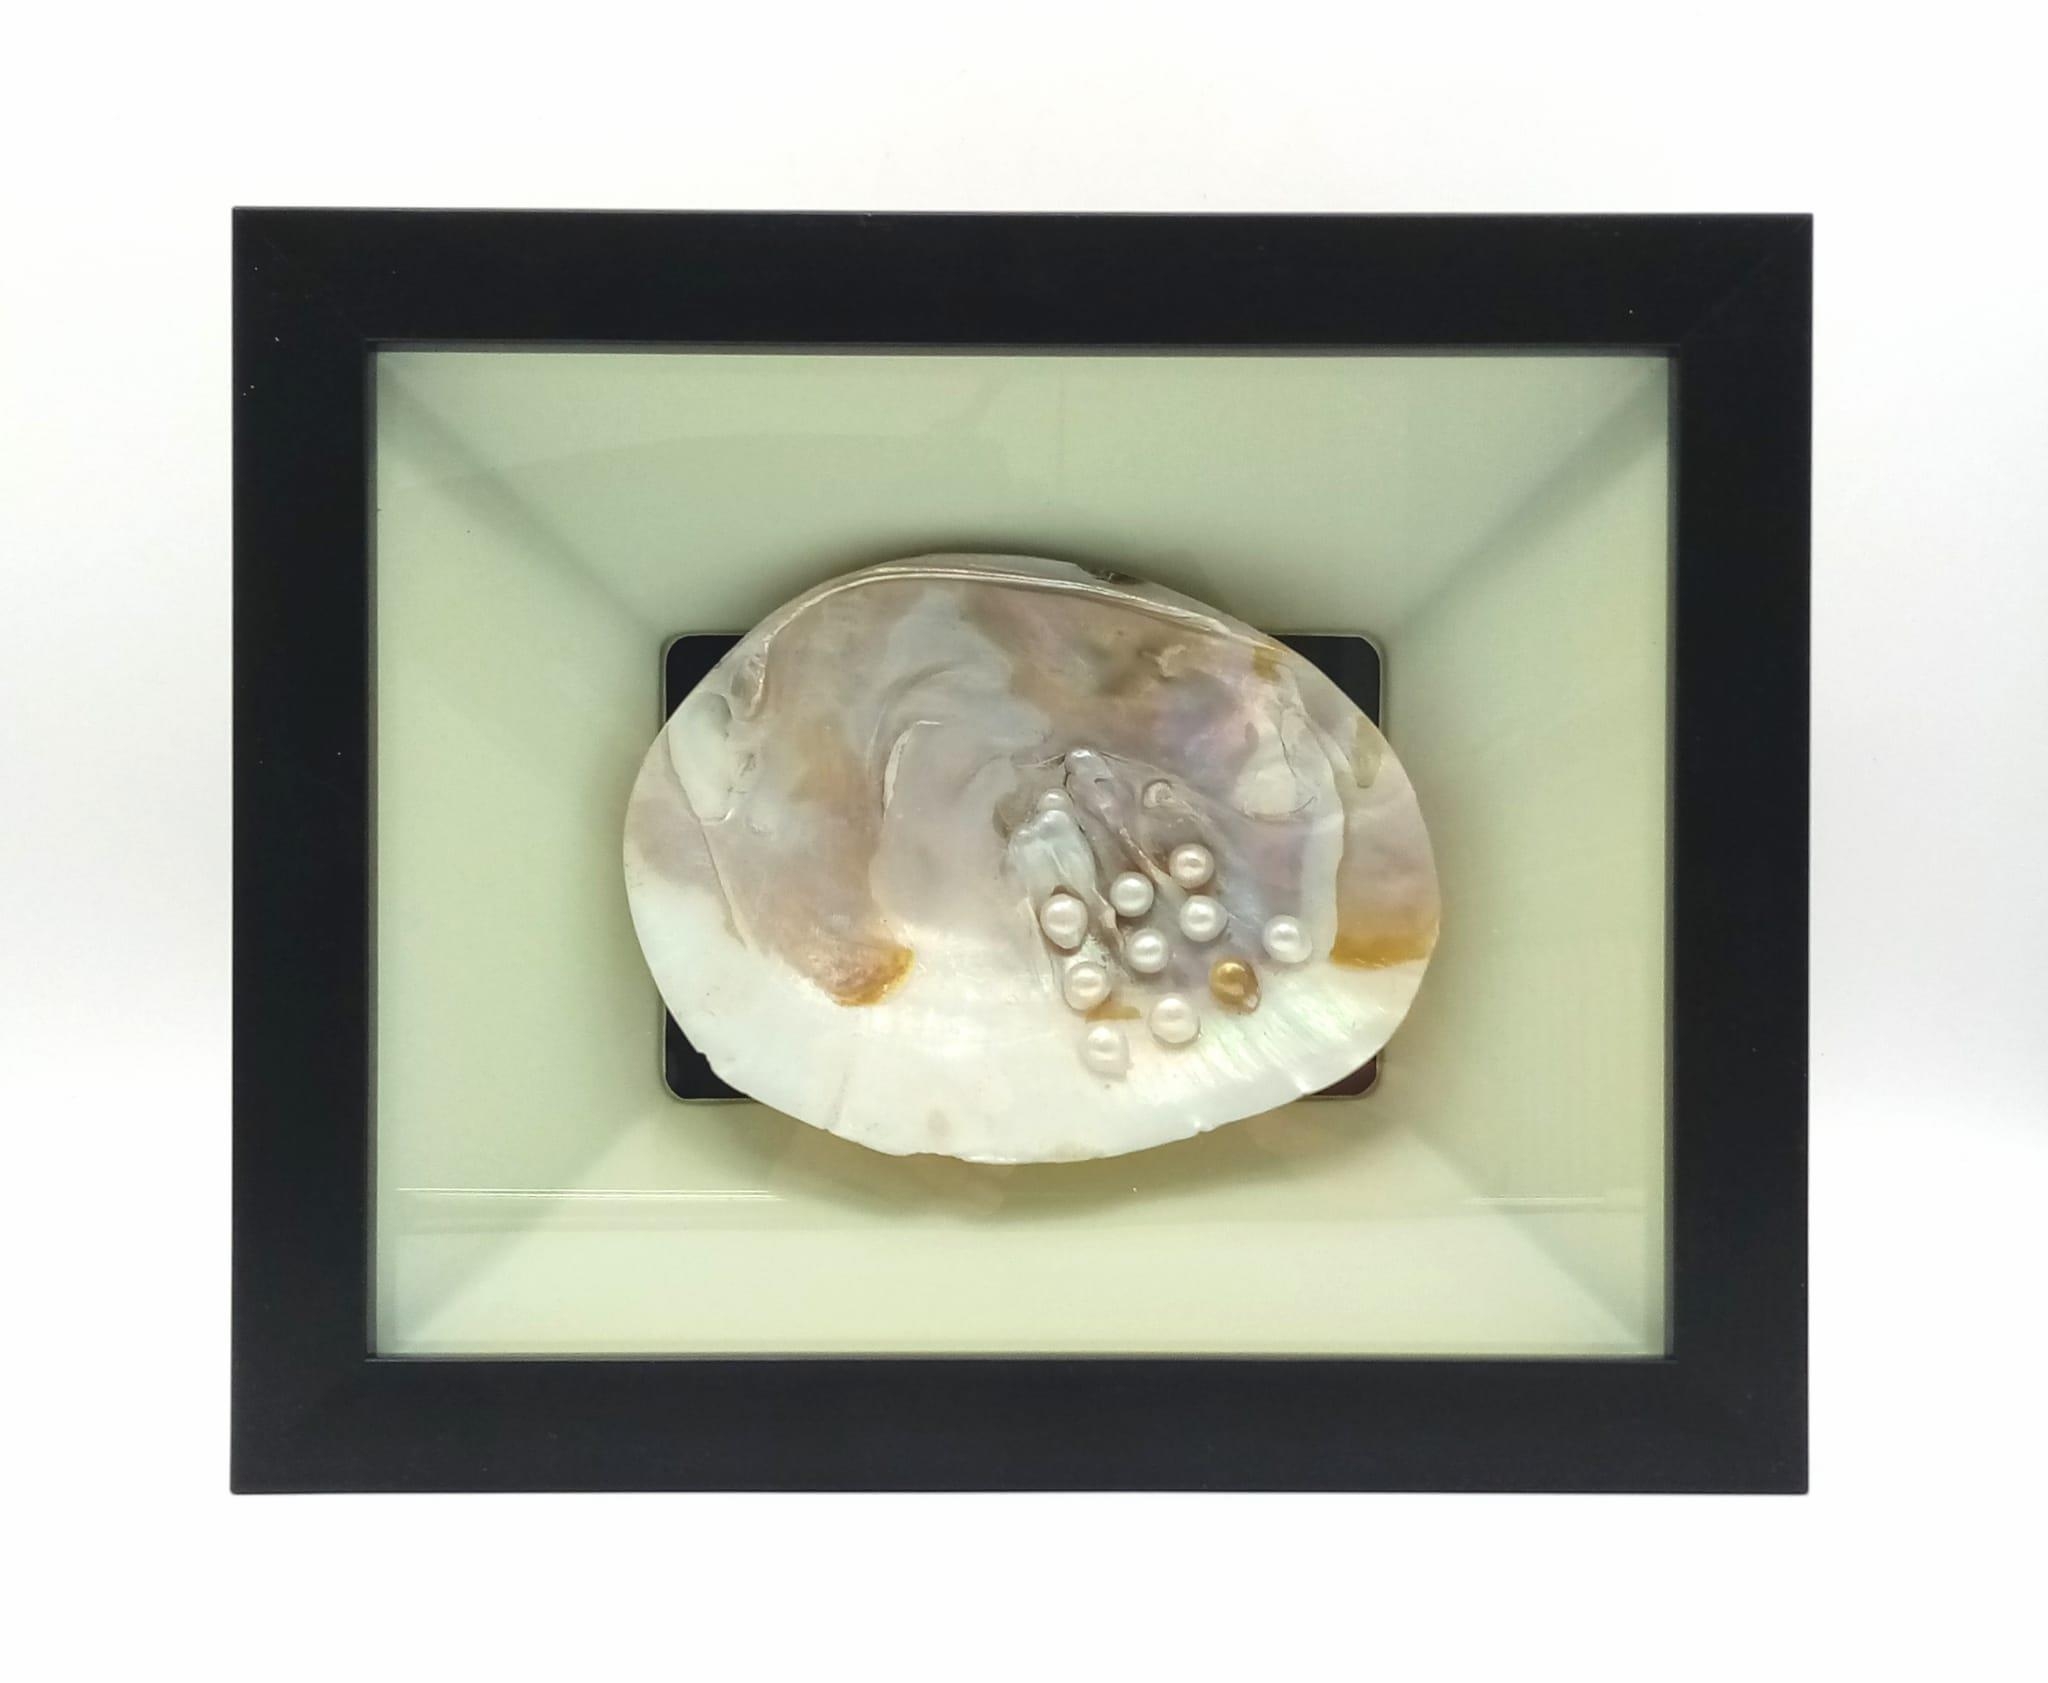 A large specimen of a fresh water mussel with pearls. Nicely presented in a black frame with